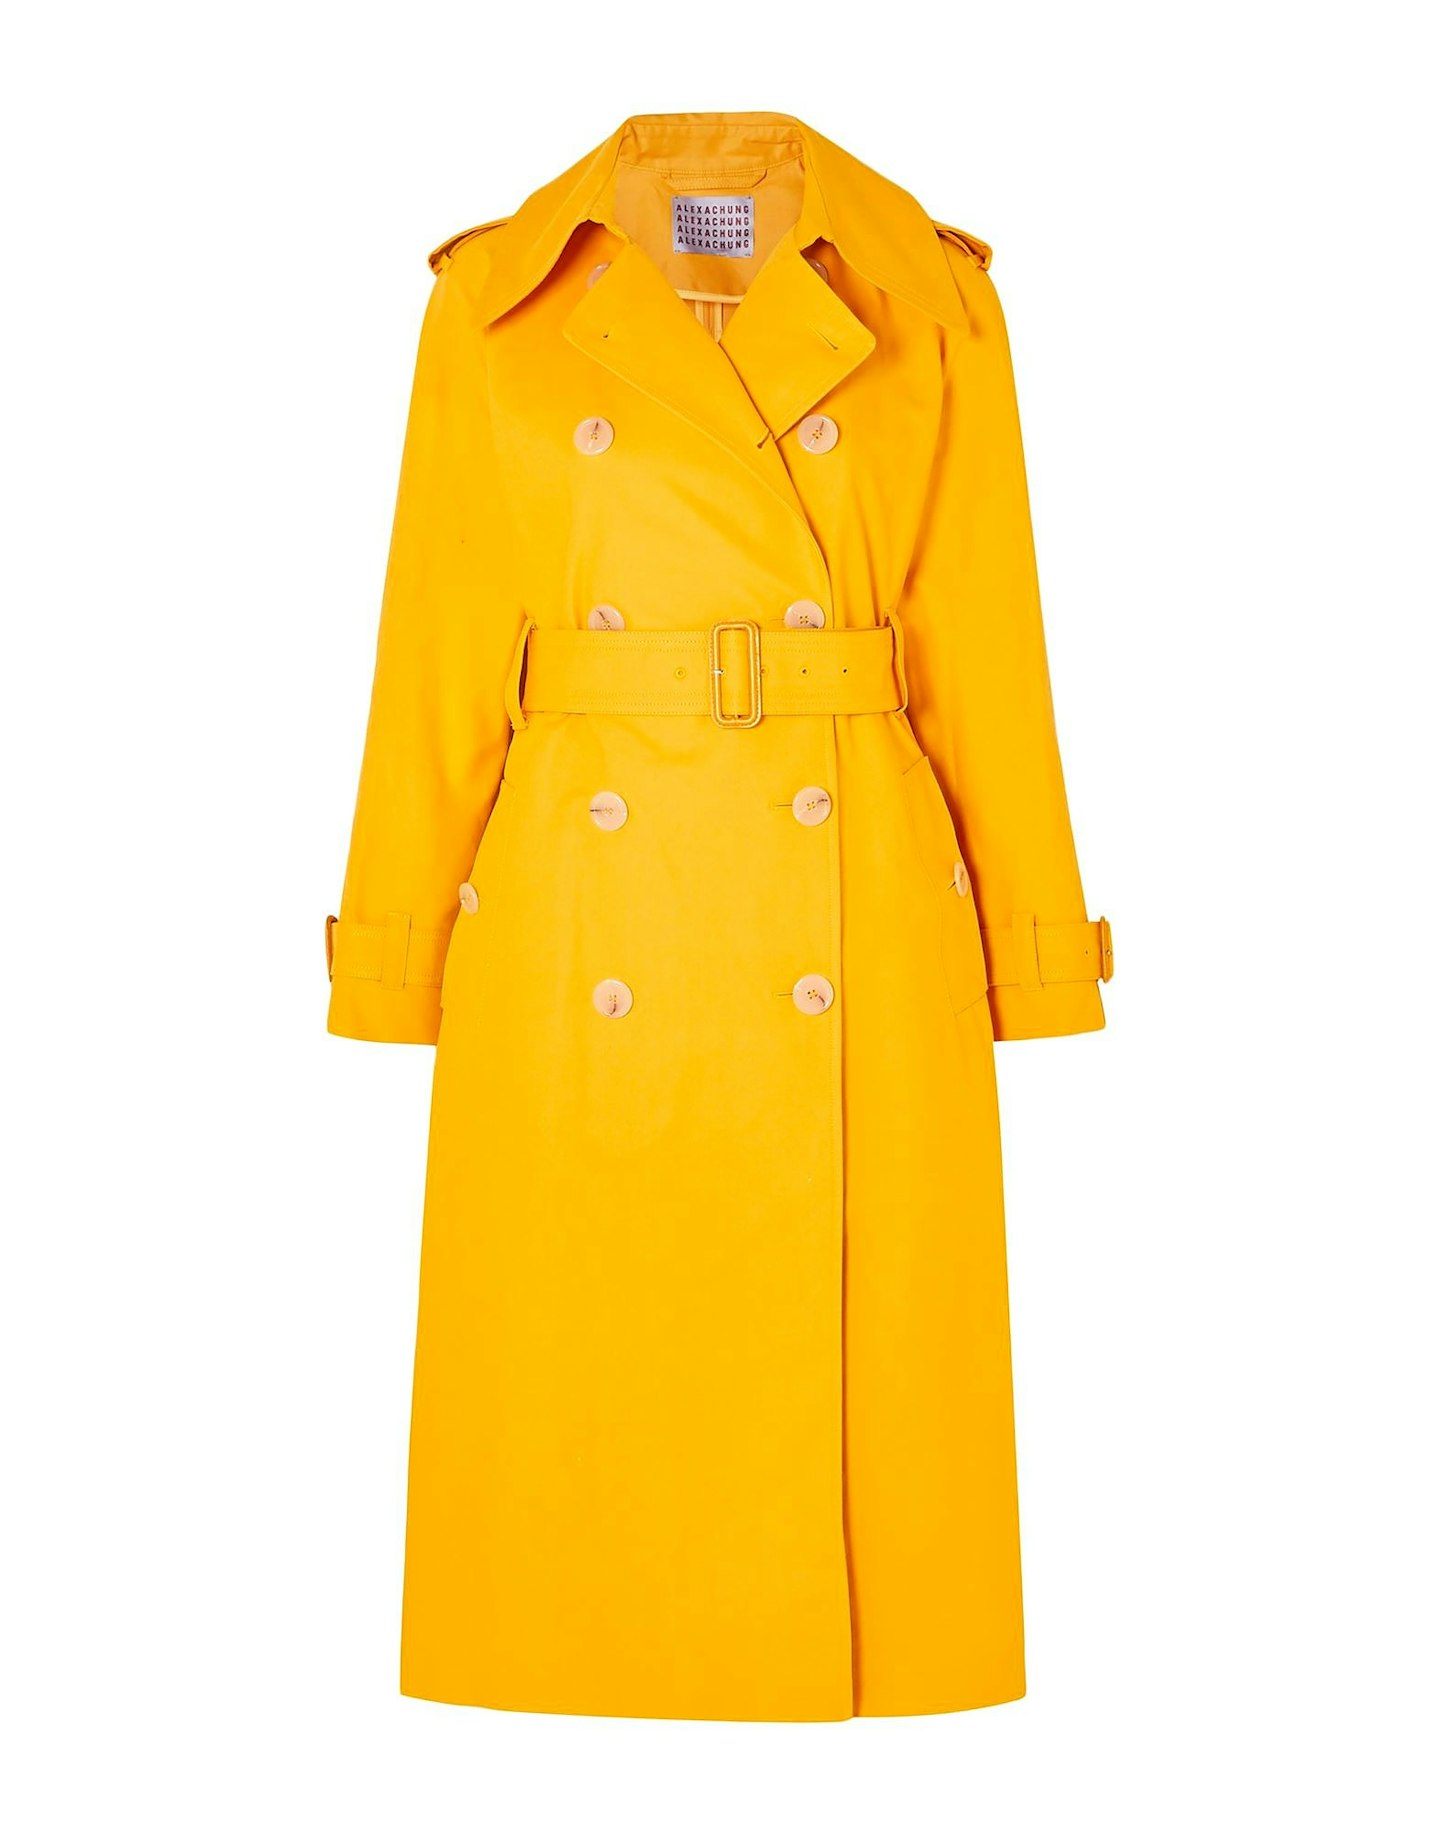 Best trench coat for women Alexachung, Double Breasted Yellow Trench Coat, £395